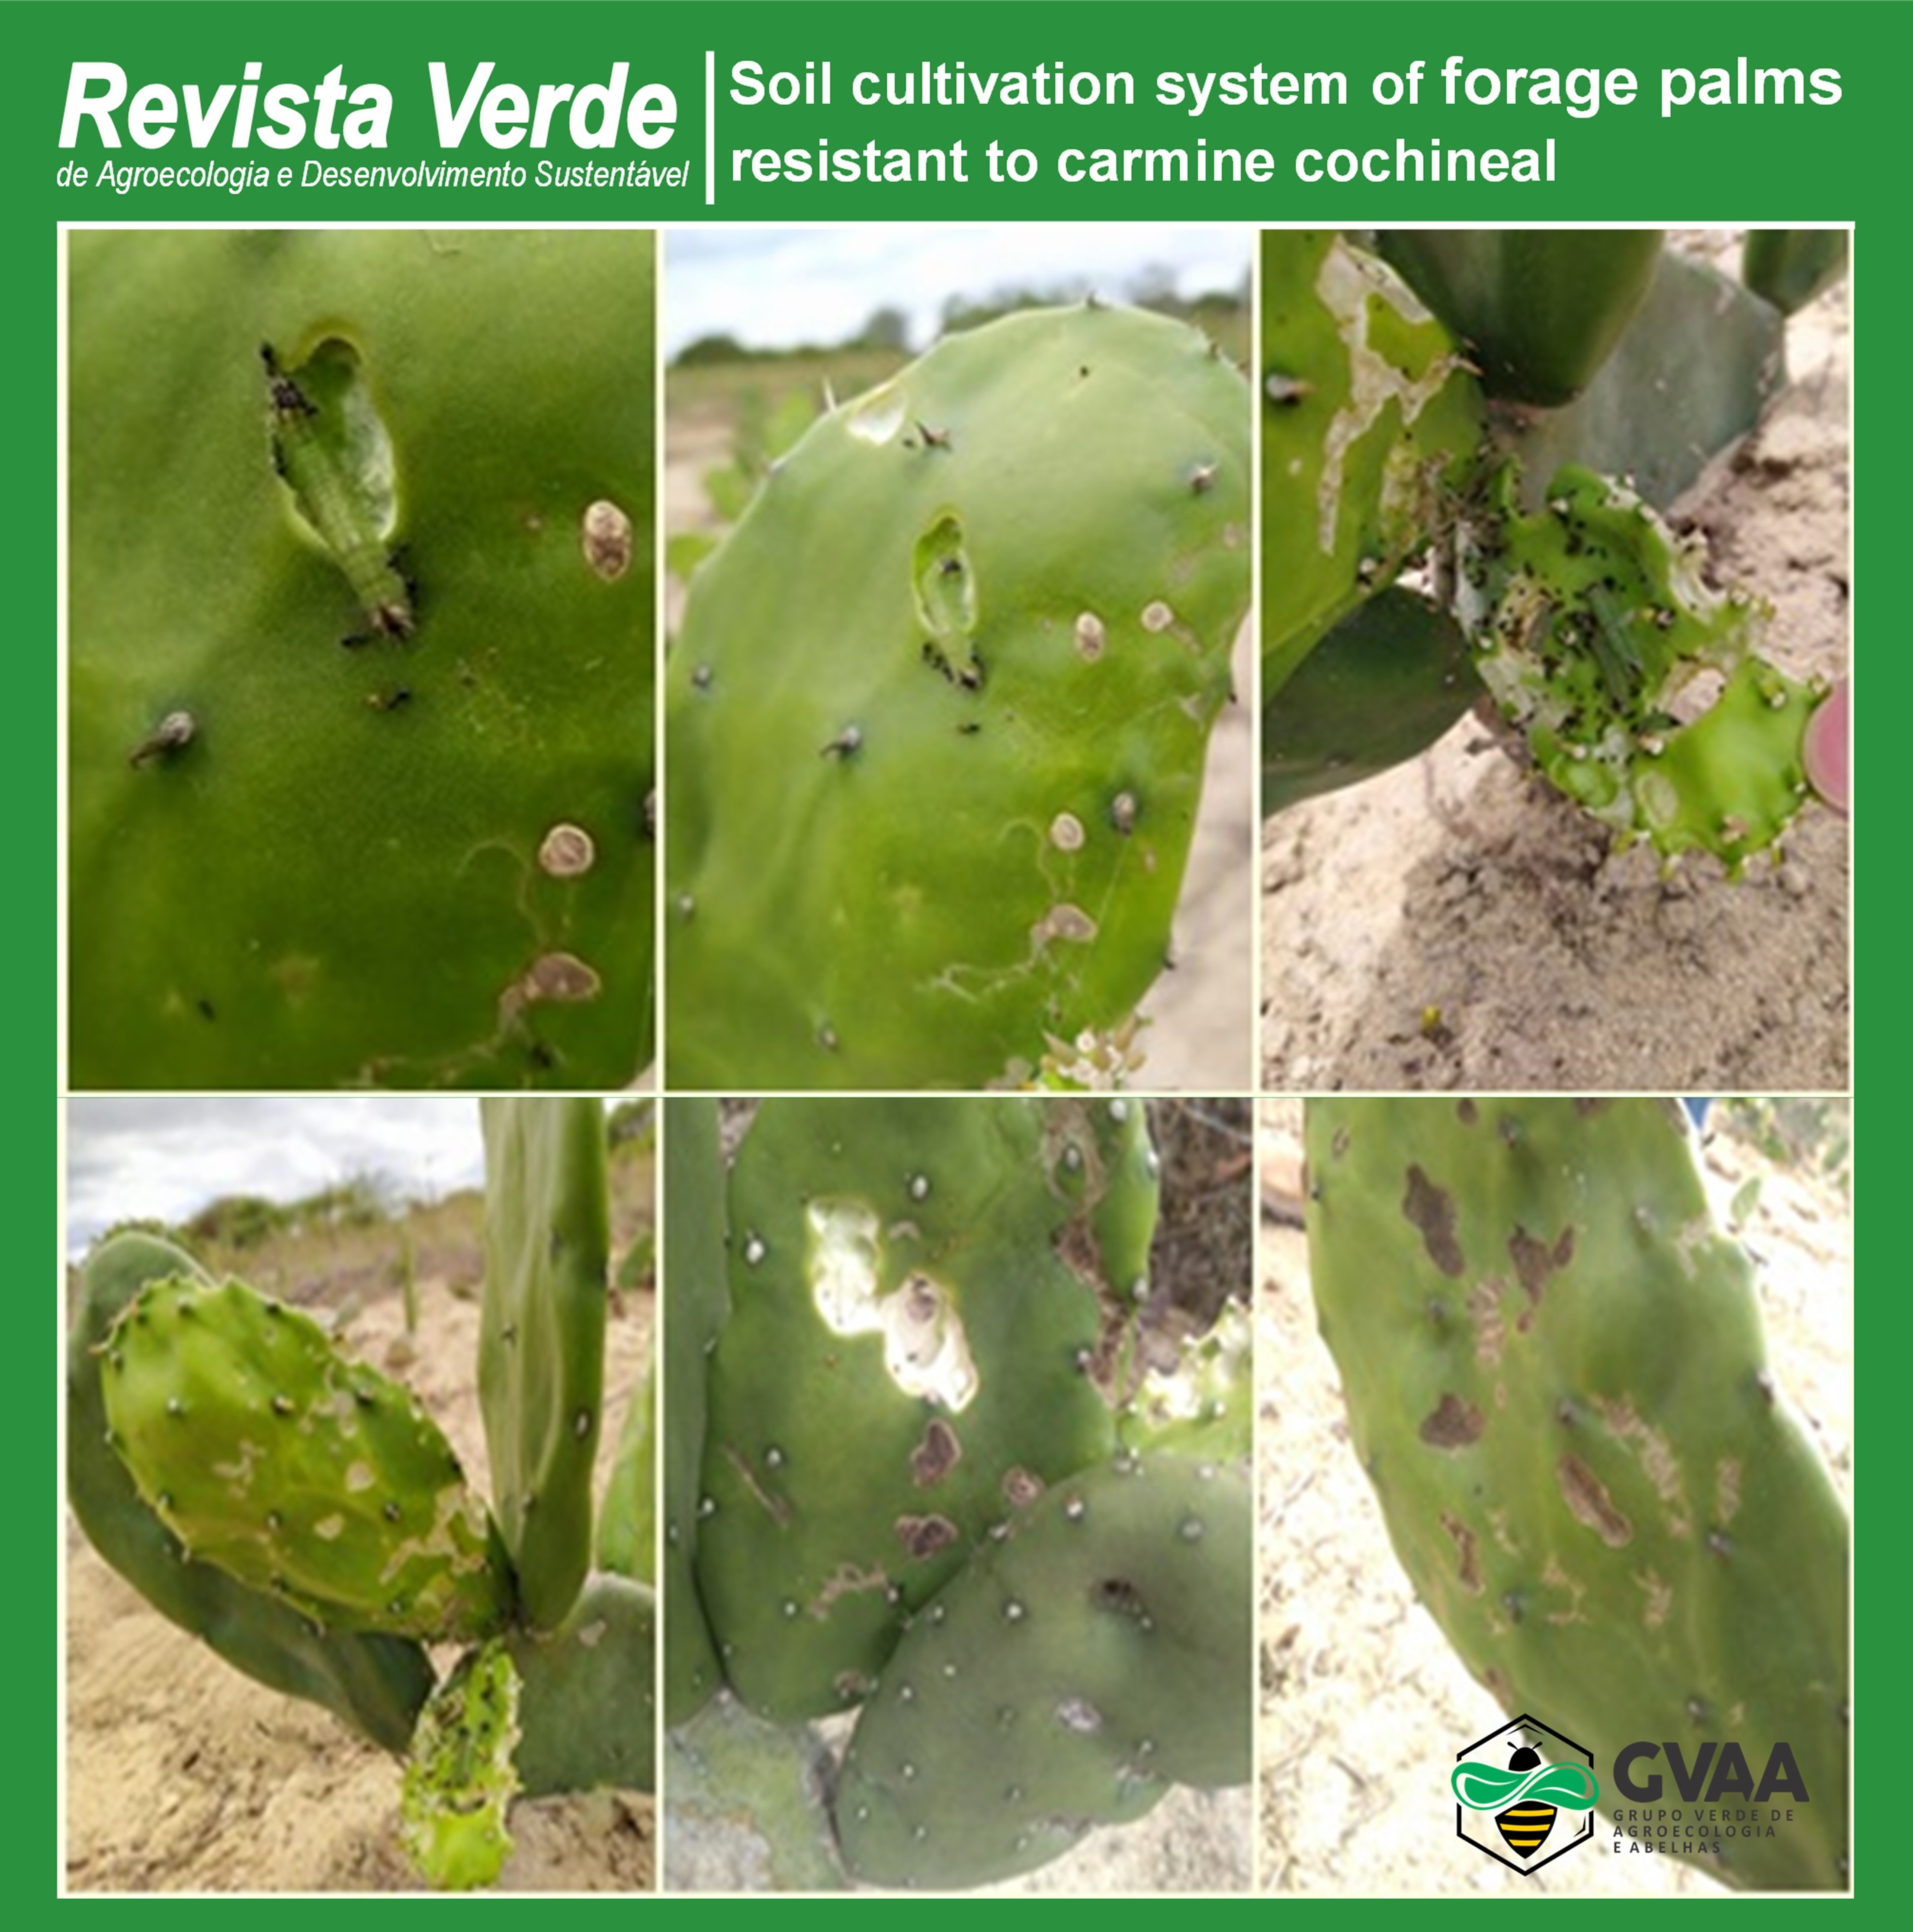 Soil cultivation system of forage palms resistant to carmine cochineal